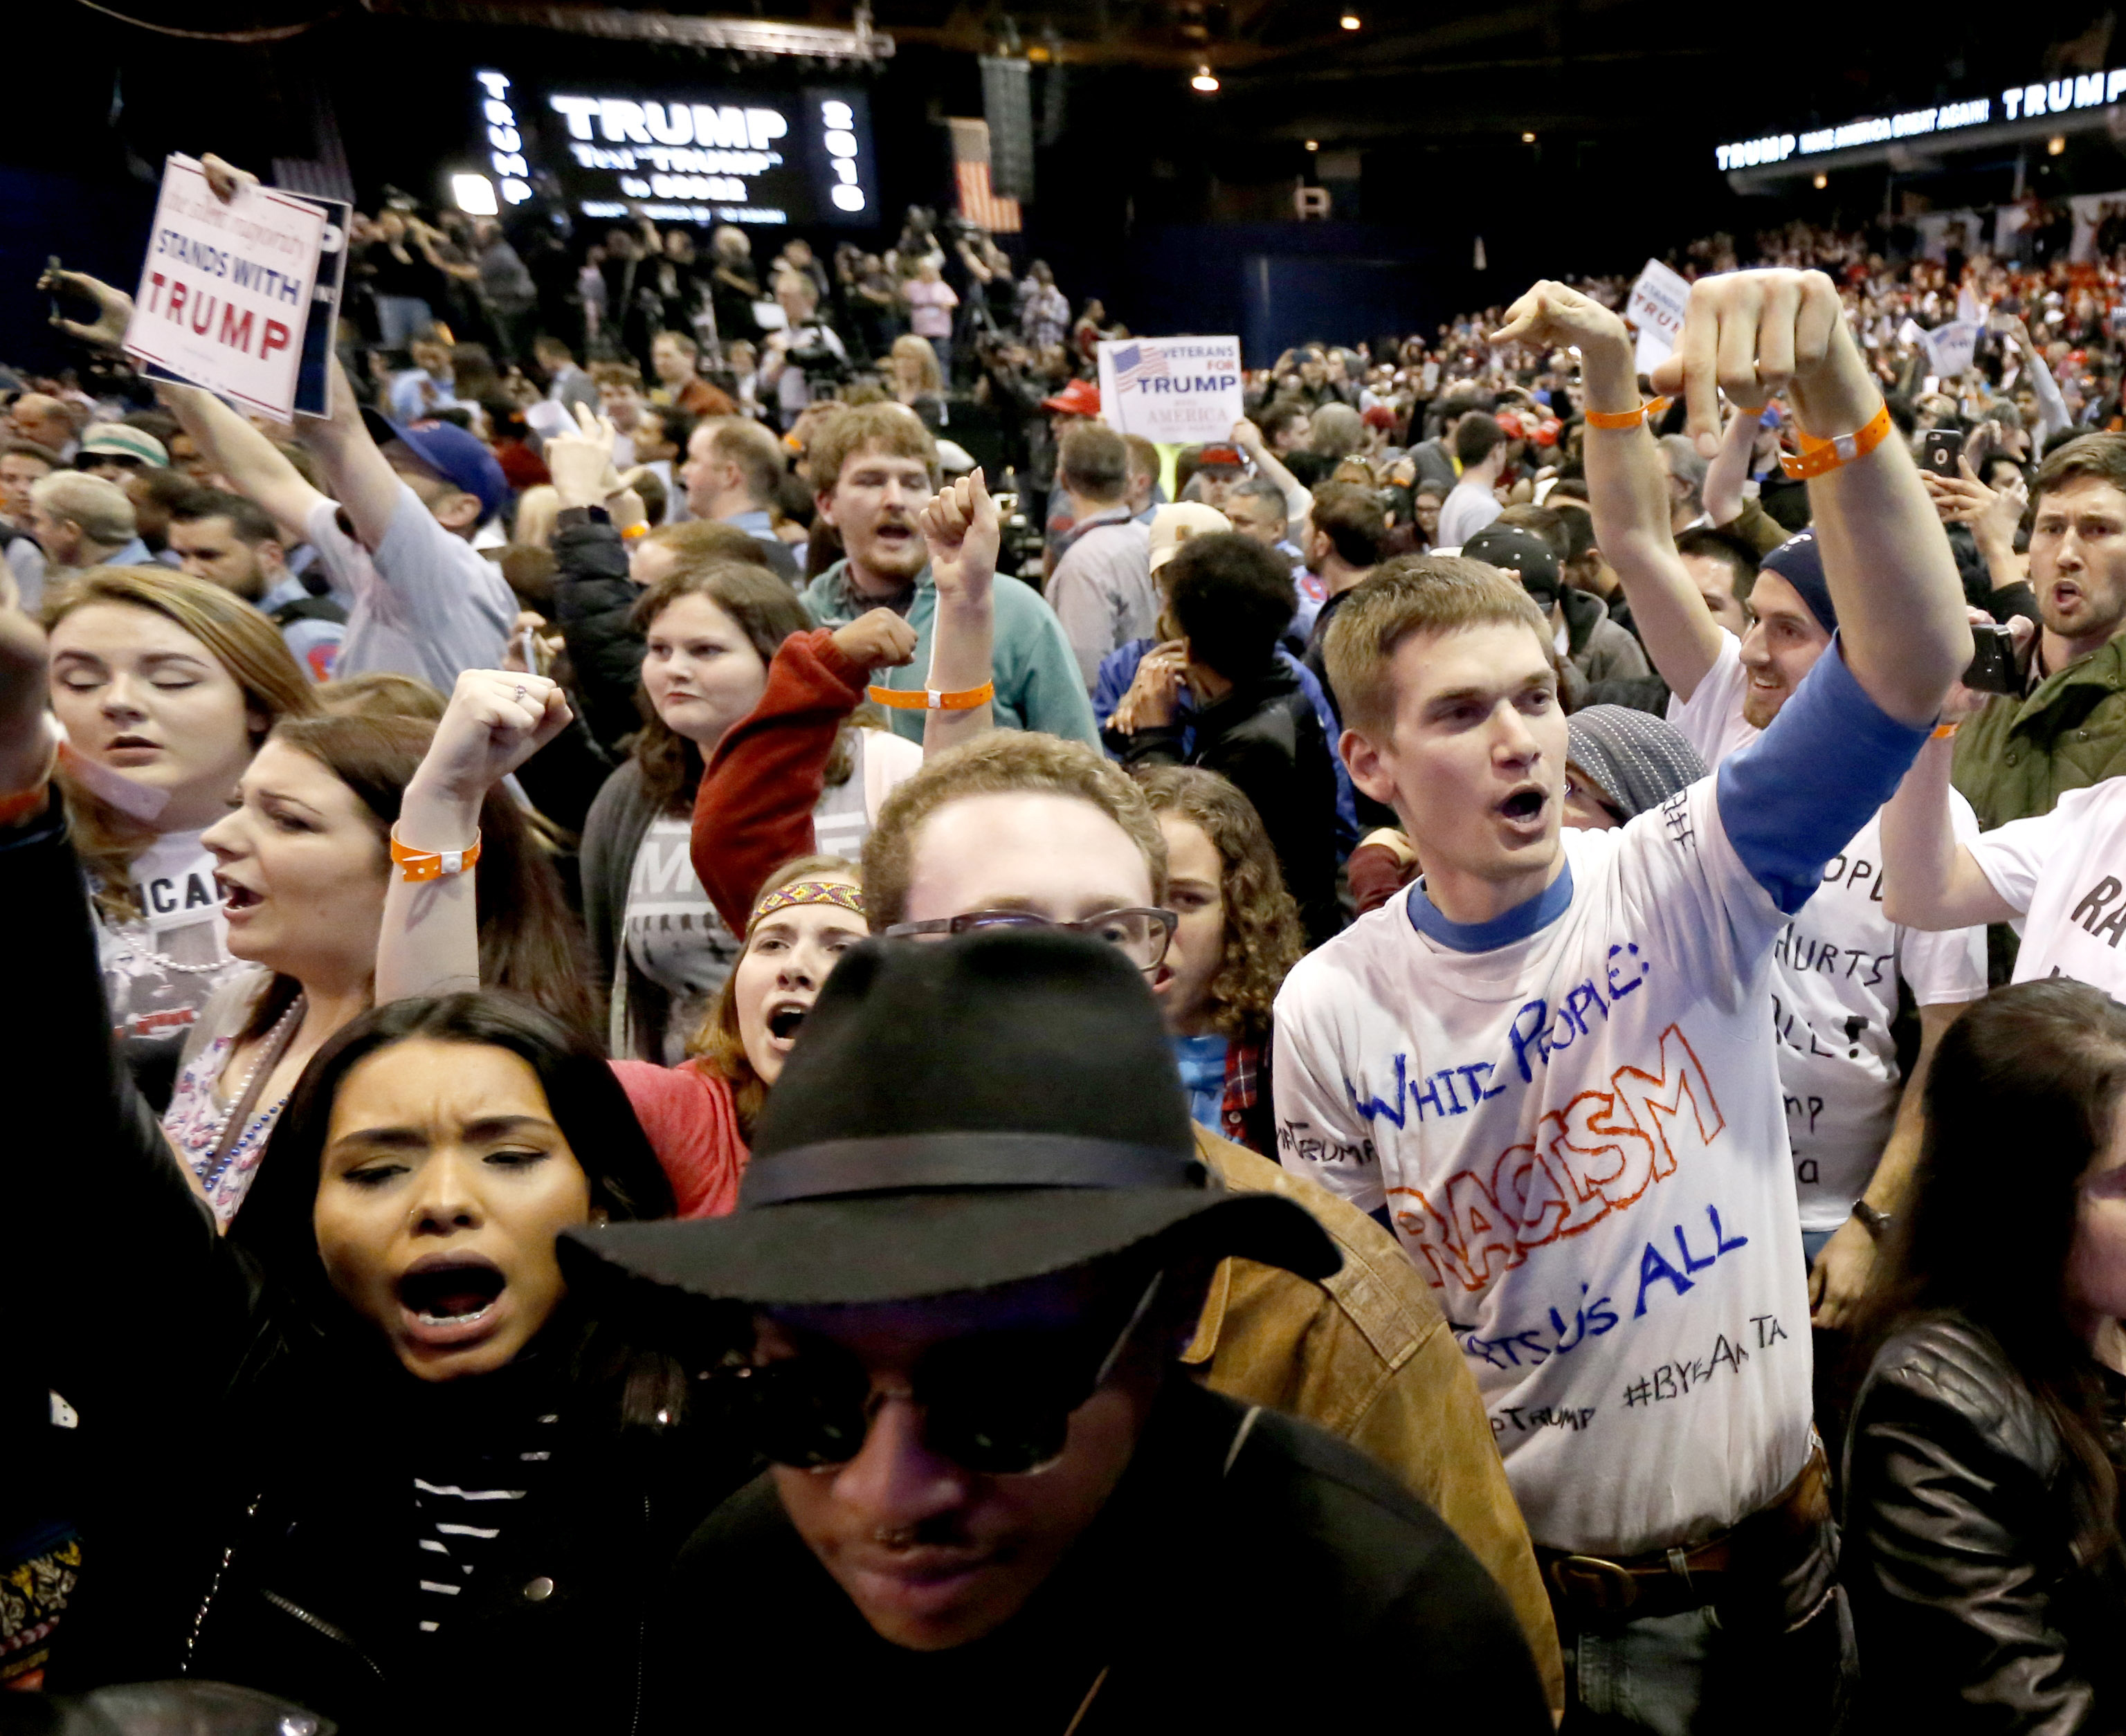 protesters gather as Trump rally is canceled in Chicago